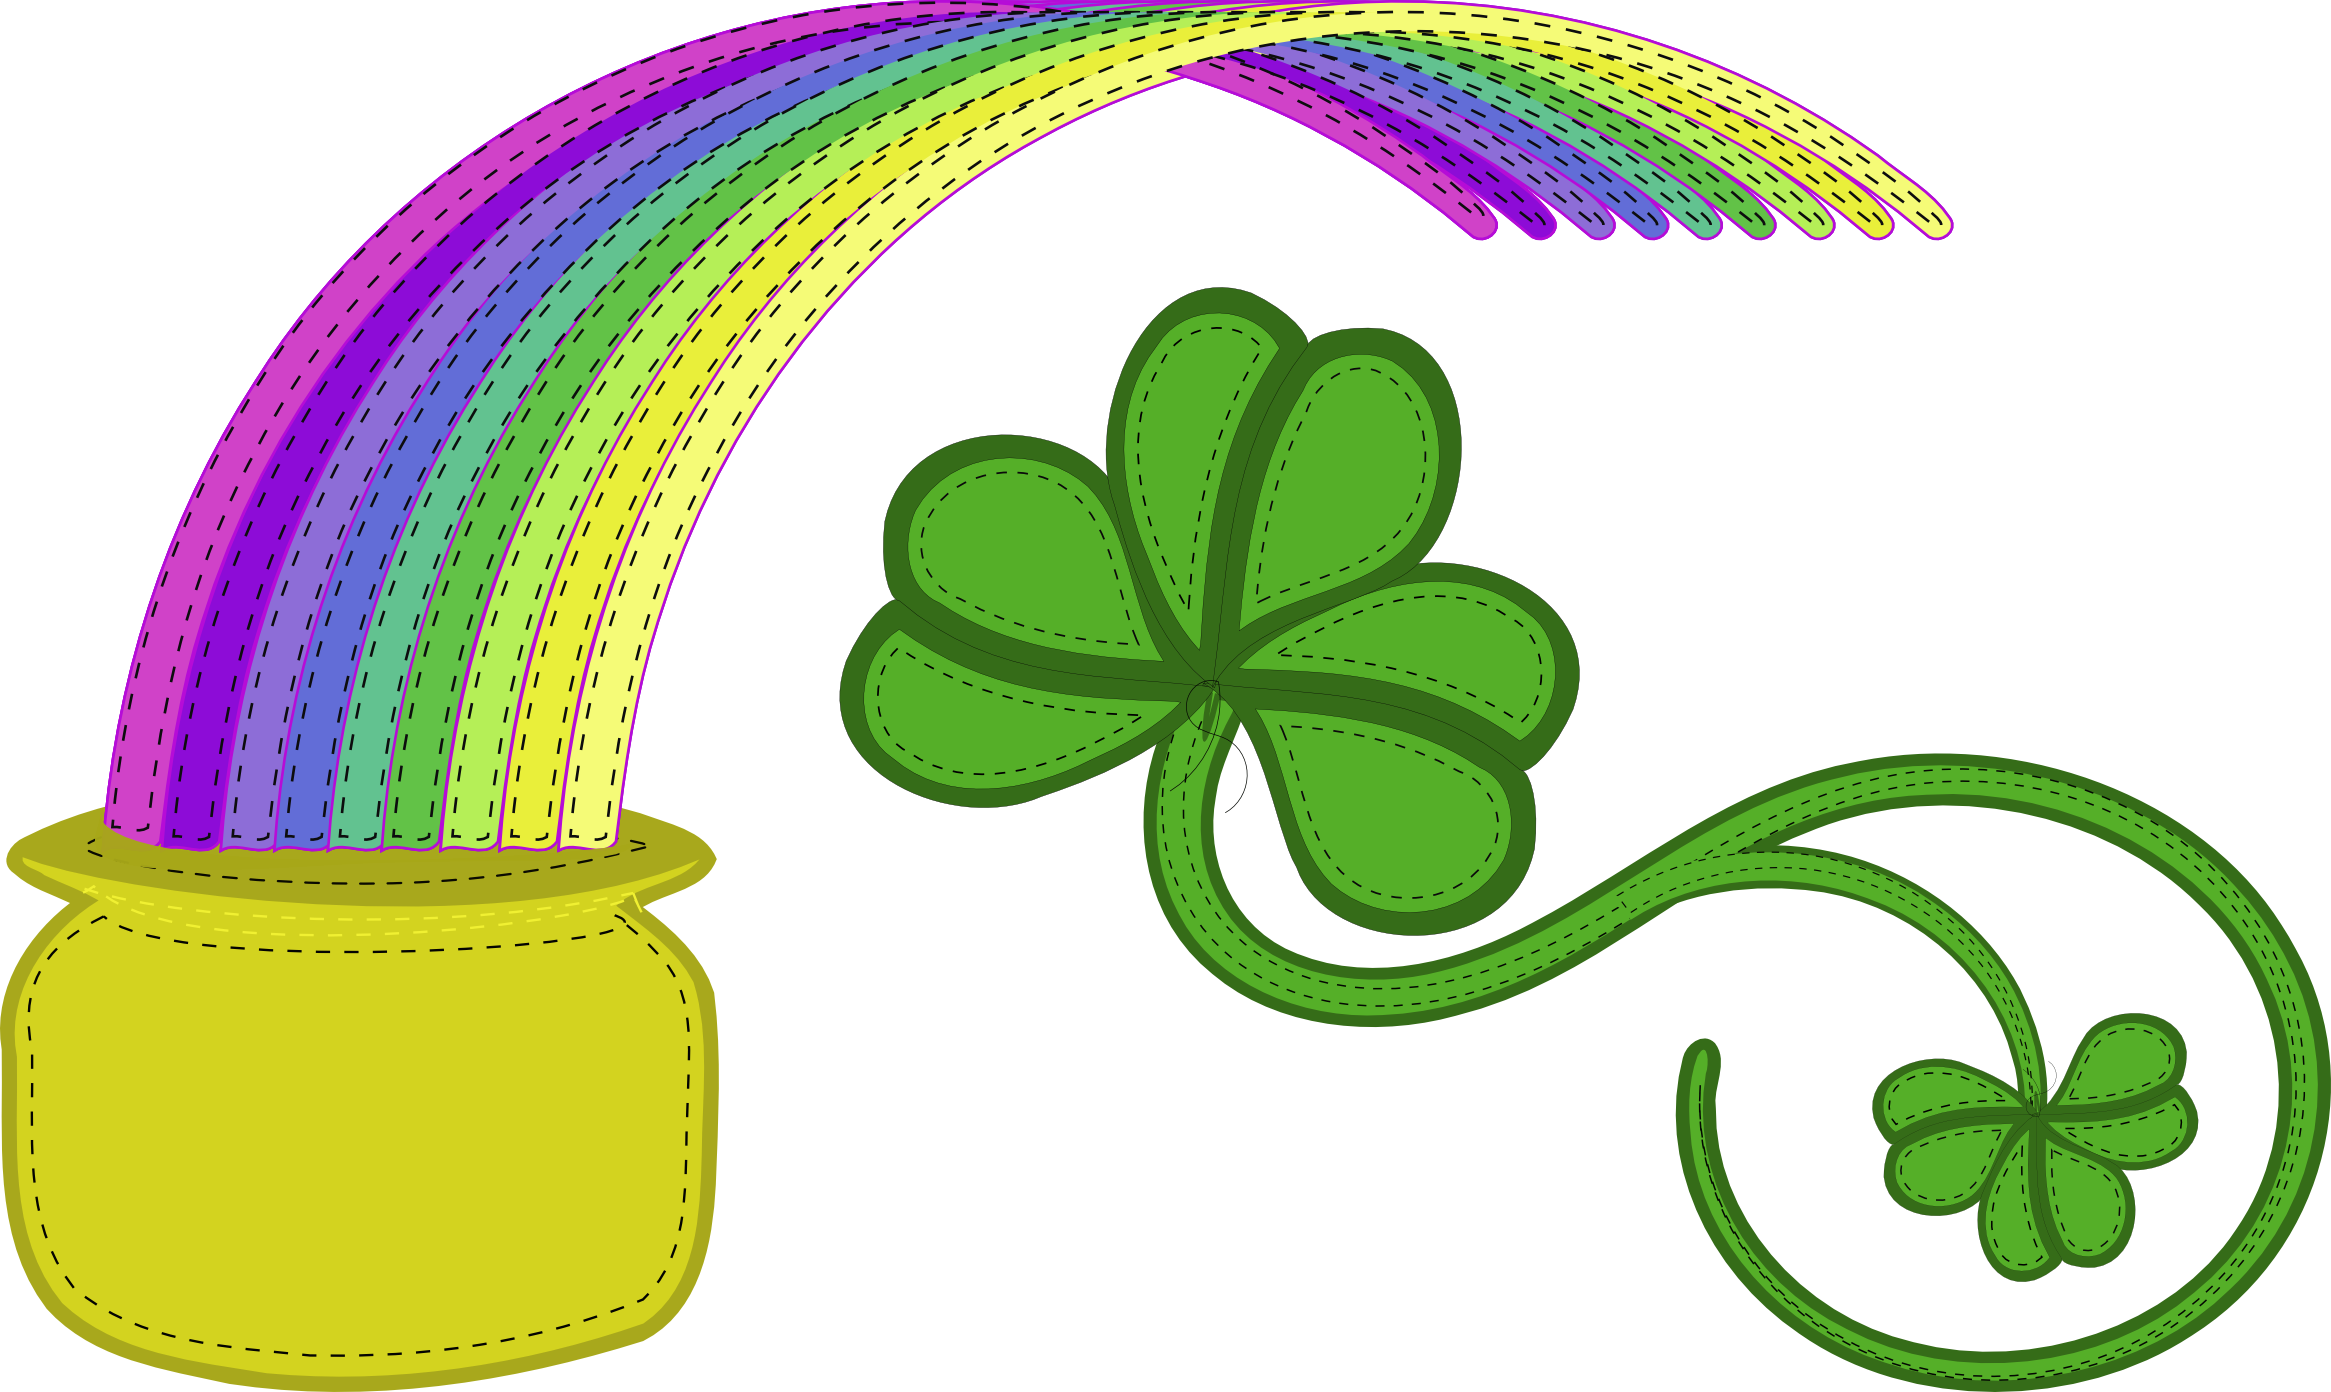 Saint Patricks Day Background Clipart Image Gallery For